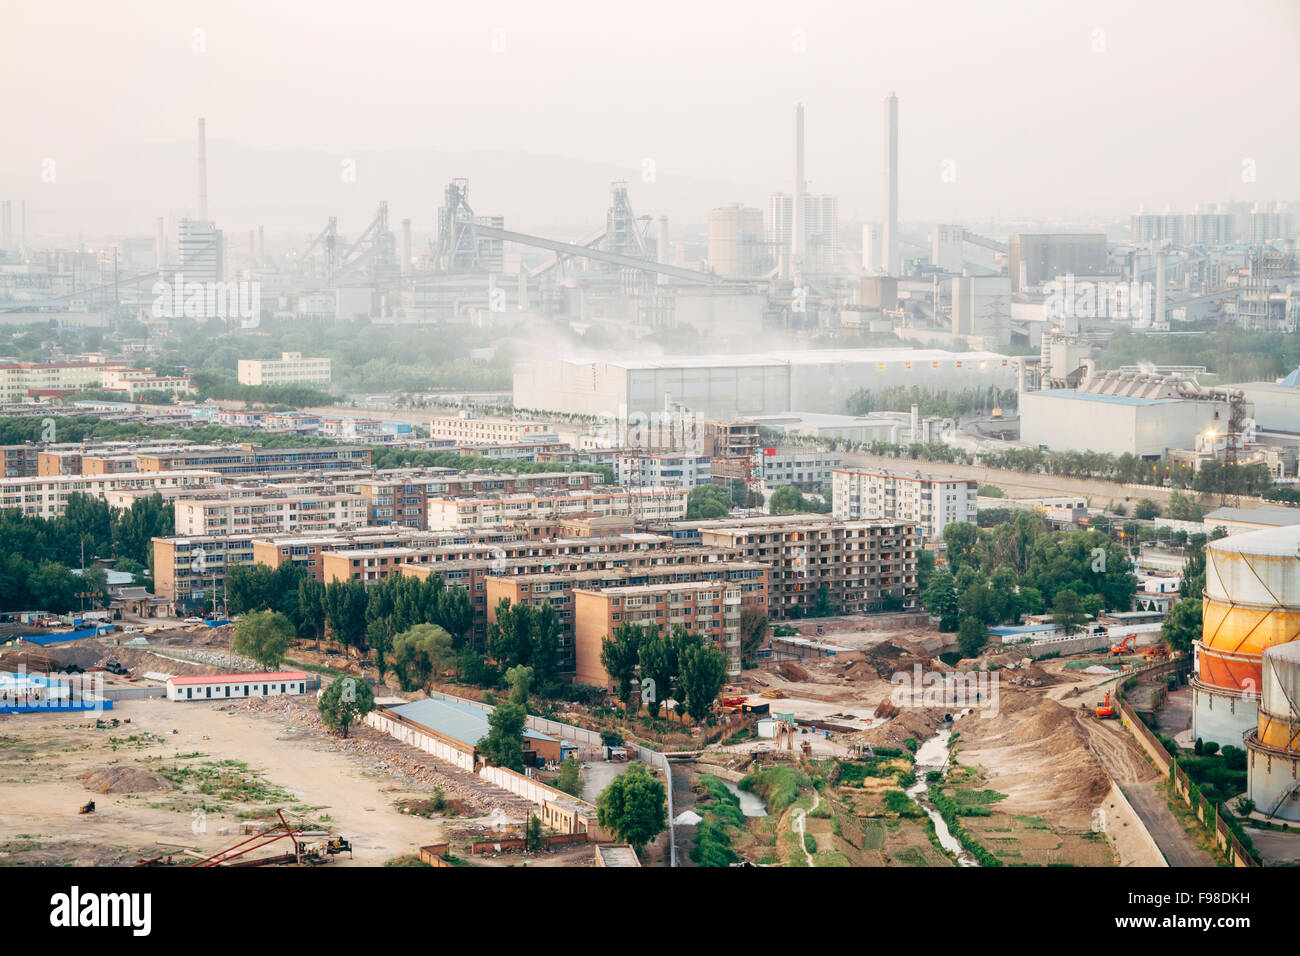 Taiyuan, Shanxi province, China - The view of Taiyuan city in the daytime. Stock Photo